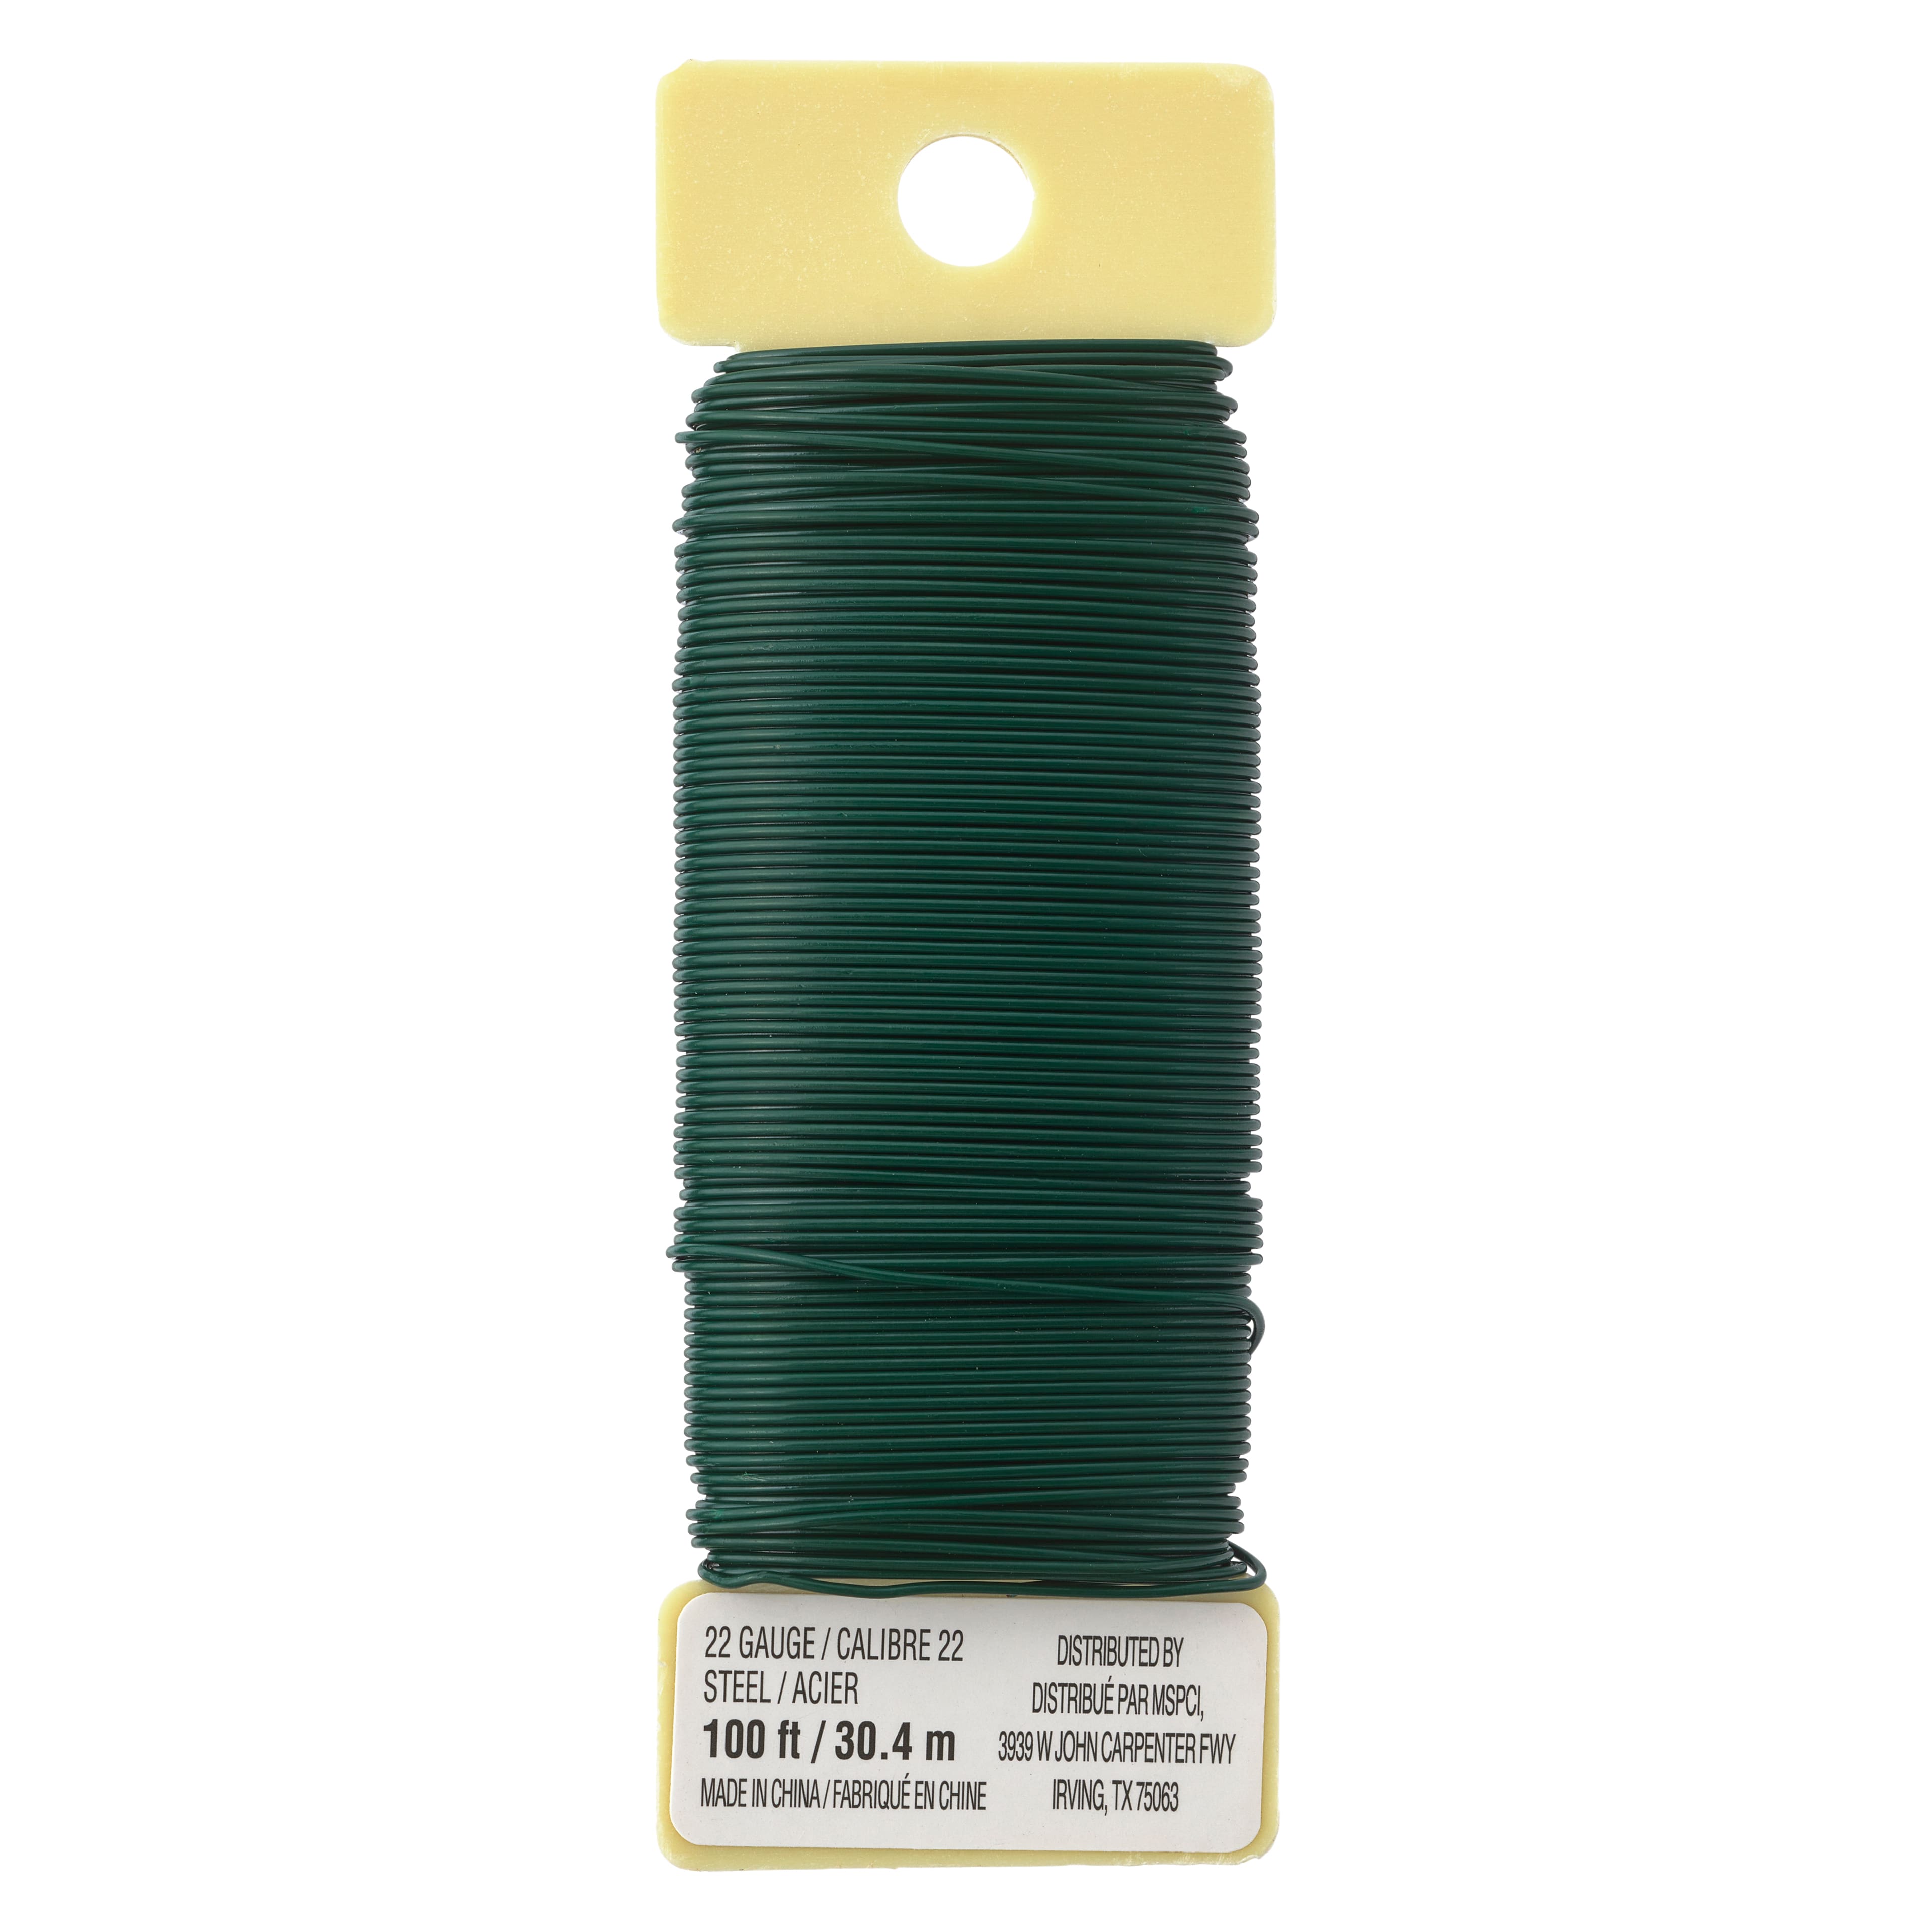 Florist Wire, thickness 0,5 mm, green, 50 m/ 1 roll